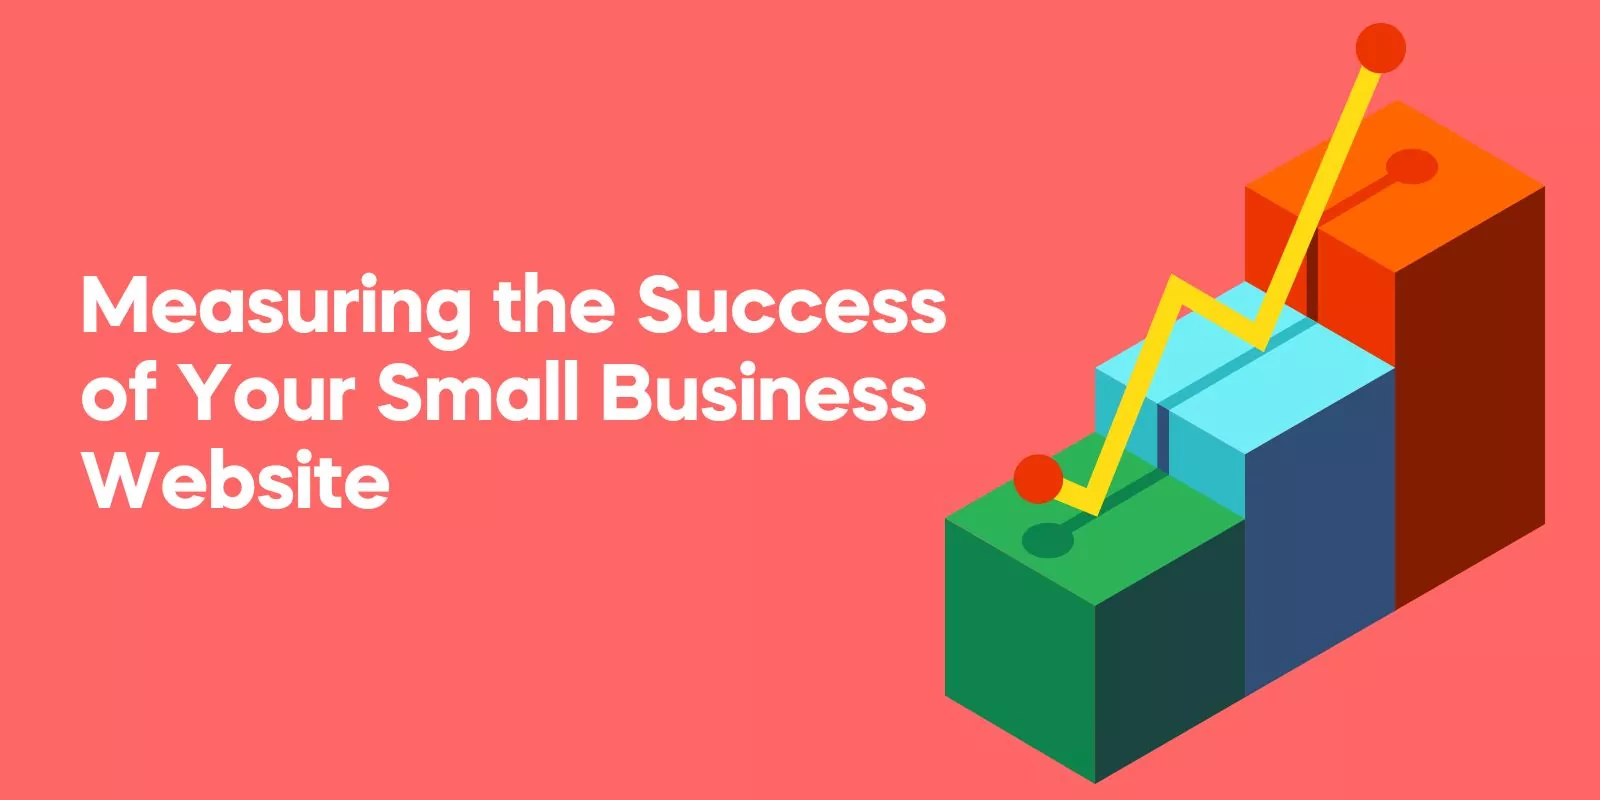 Measuring the Success of Your Small Business Website